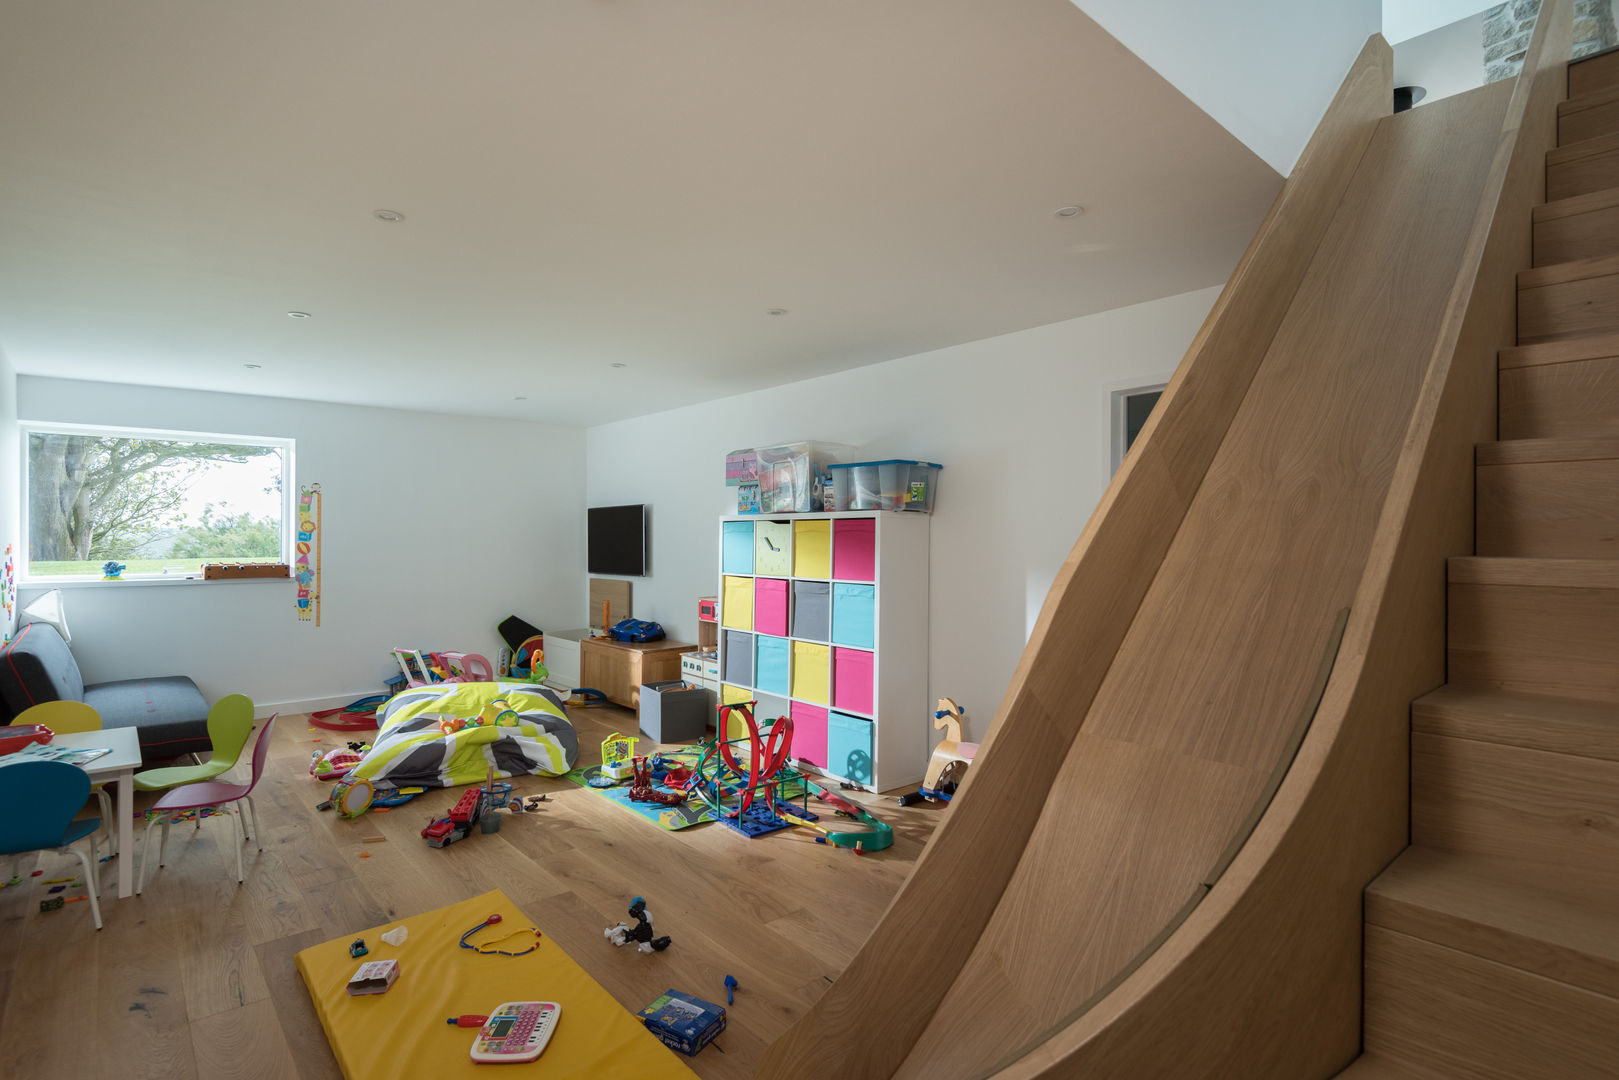 Contemporary Replacement Dwelling, Cubert, Laurence Associates Laurence Associates Дитяча кімната play room,game room,internal slide,fun,games,storage,children,toys,modular storage,bright colours,play,kids room